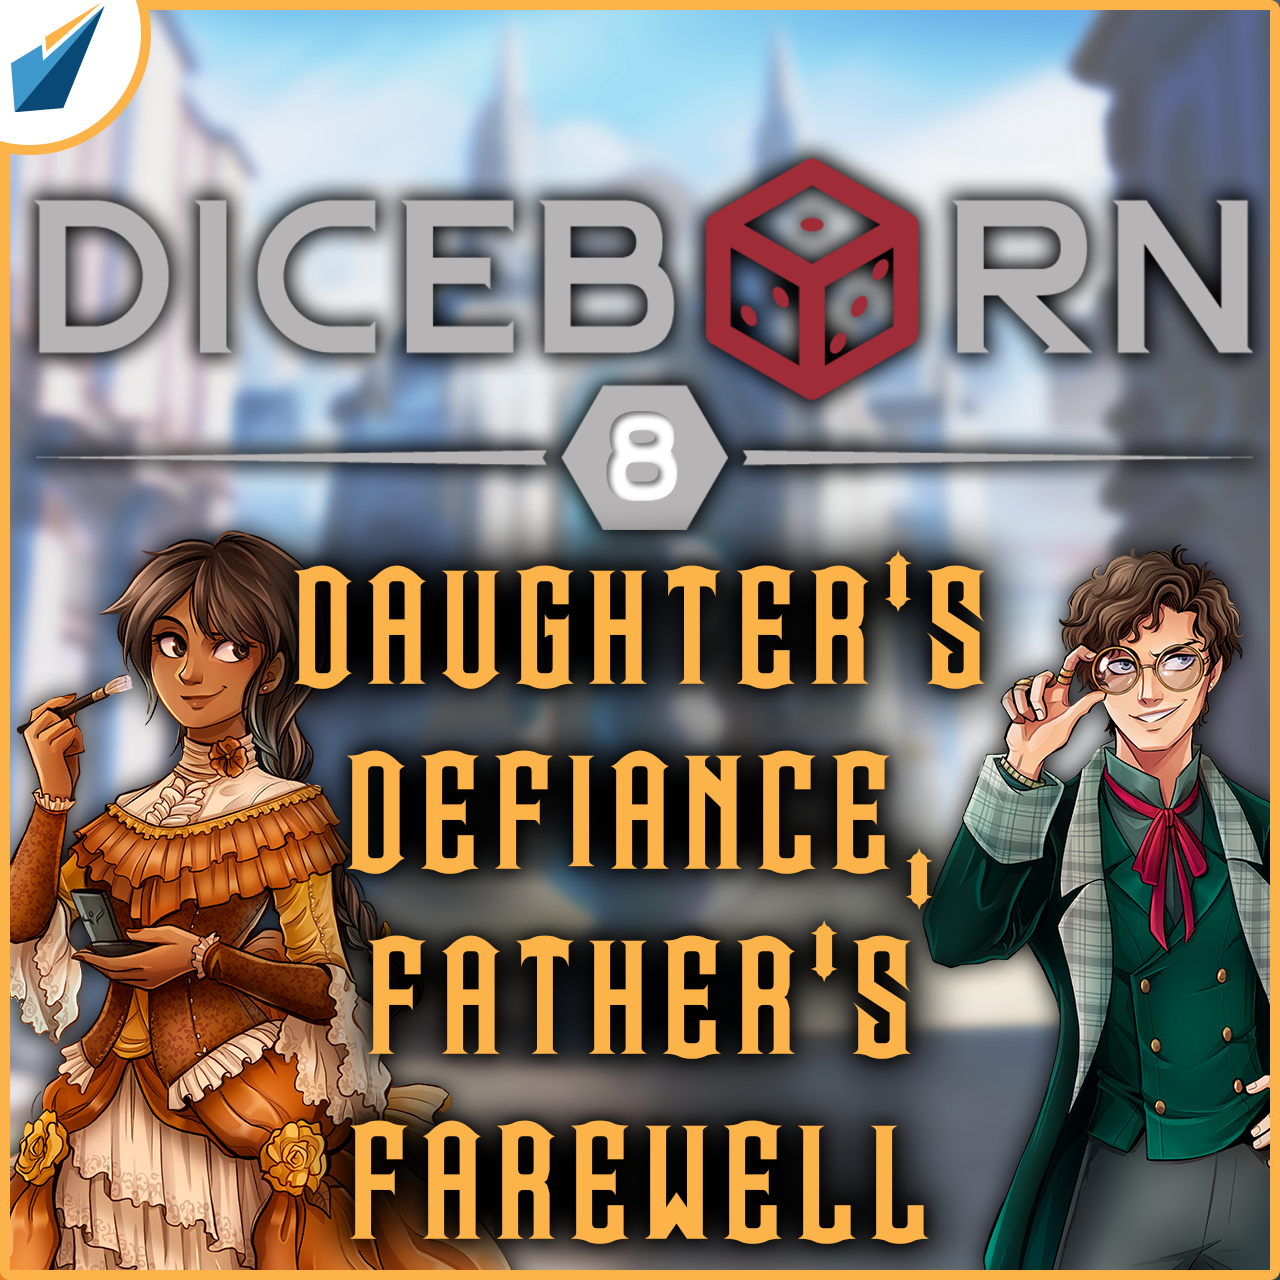 More information about "Diceborn: Episode 8 - Daughter's Defiance, Father's Farewell"